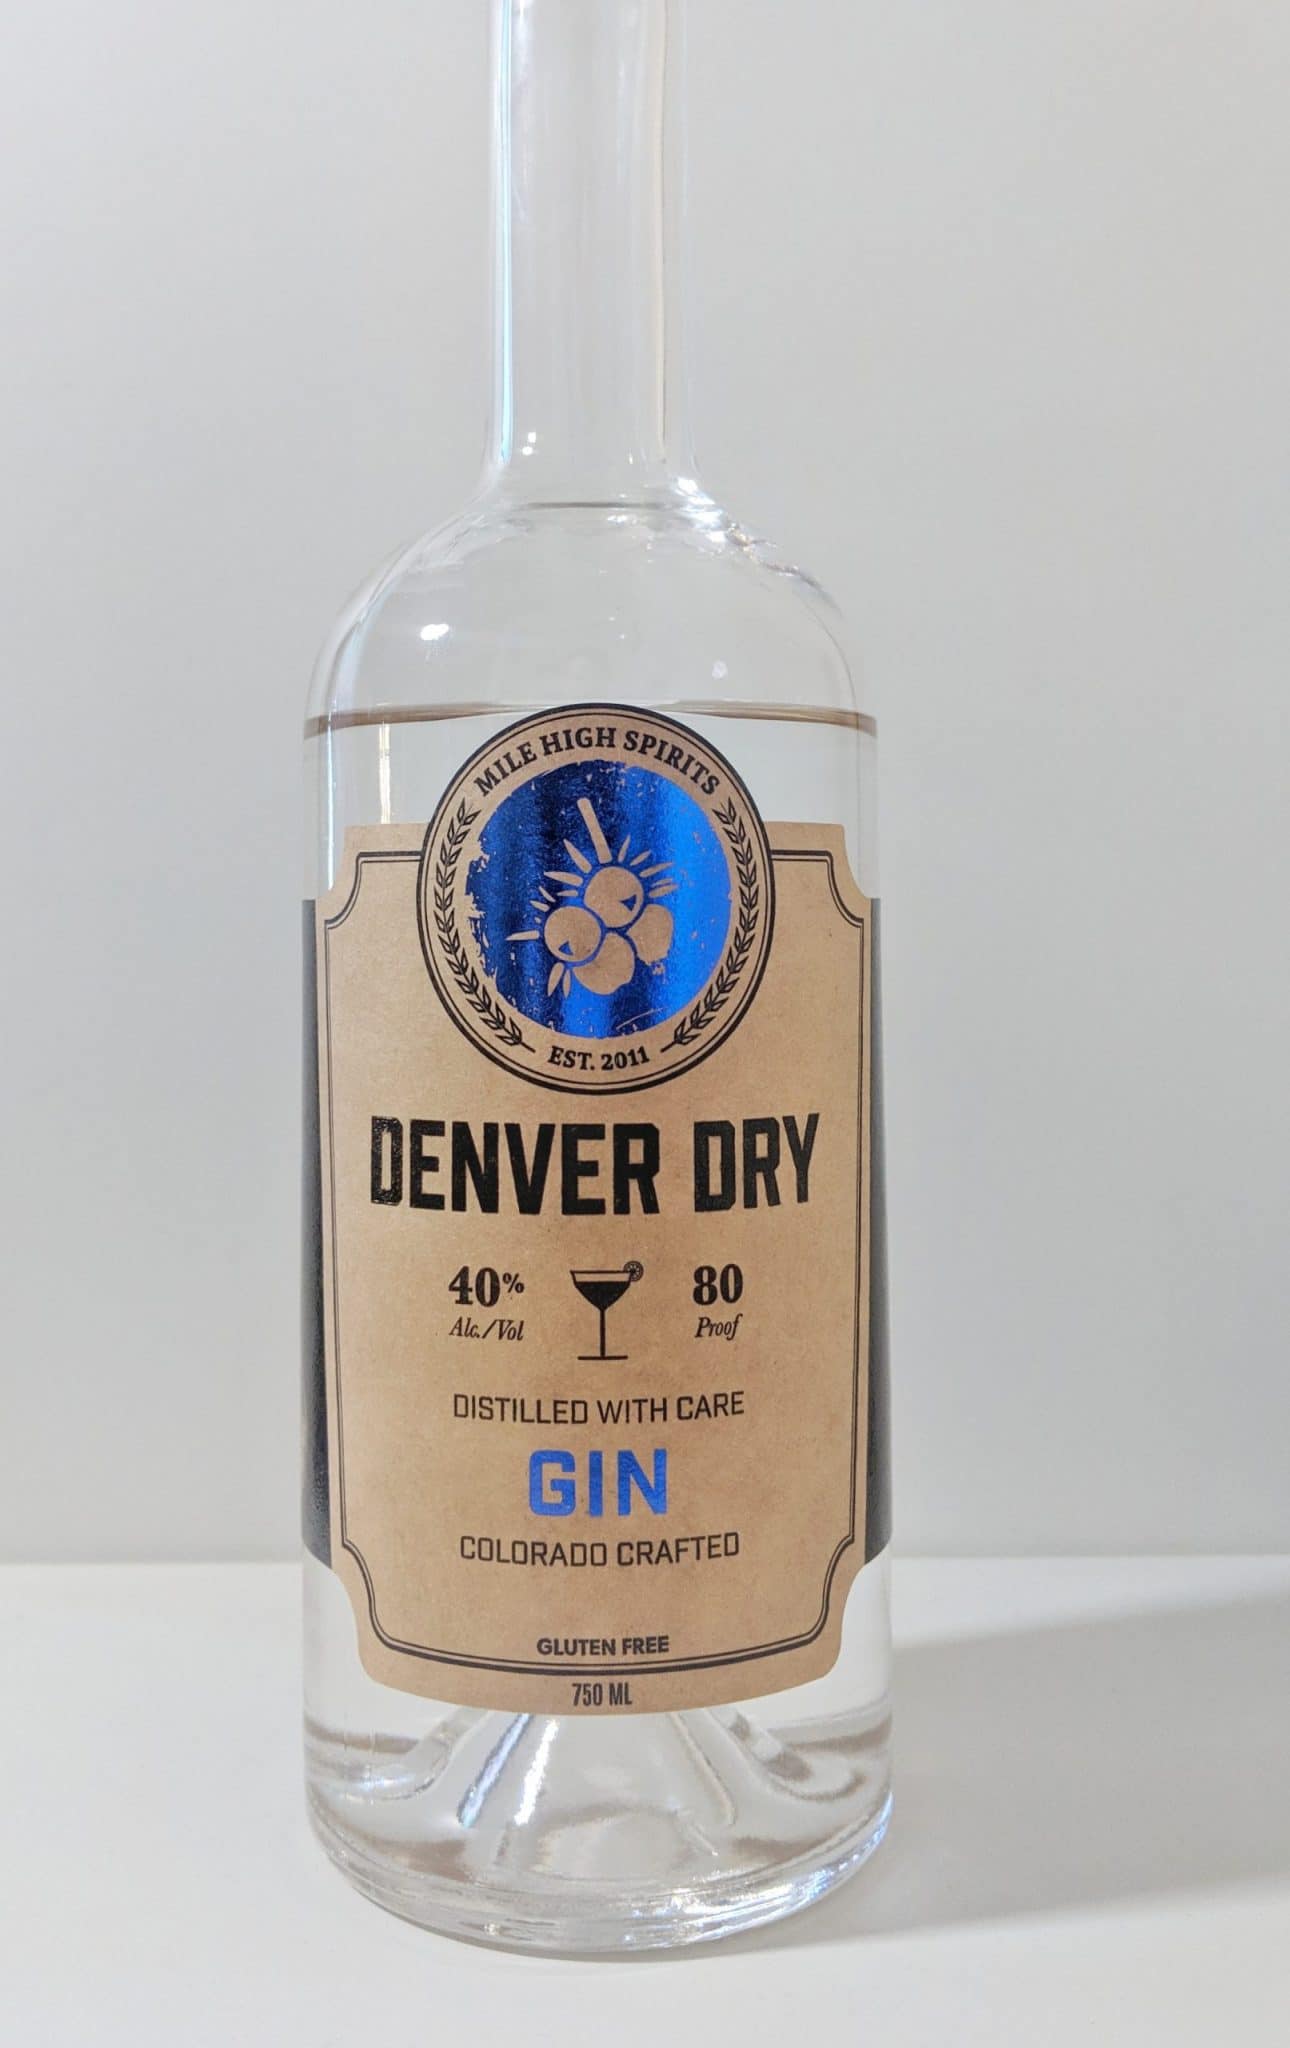 Denver Dry Gin from Mile High Spirits Review and Rating the GIN is IN